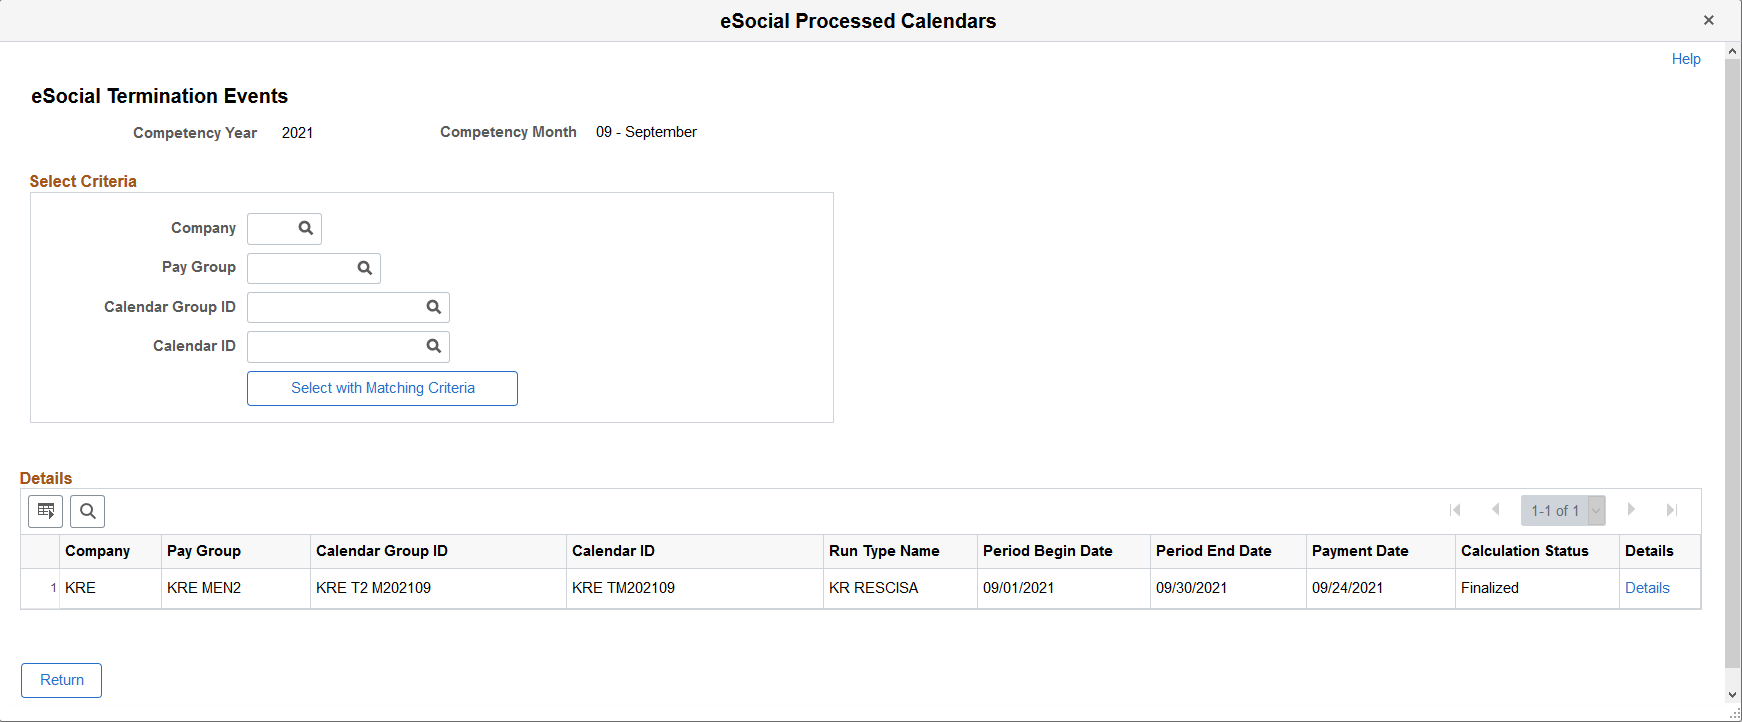 eSocial Processed Calendars - eSocial Termination Events page